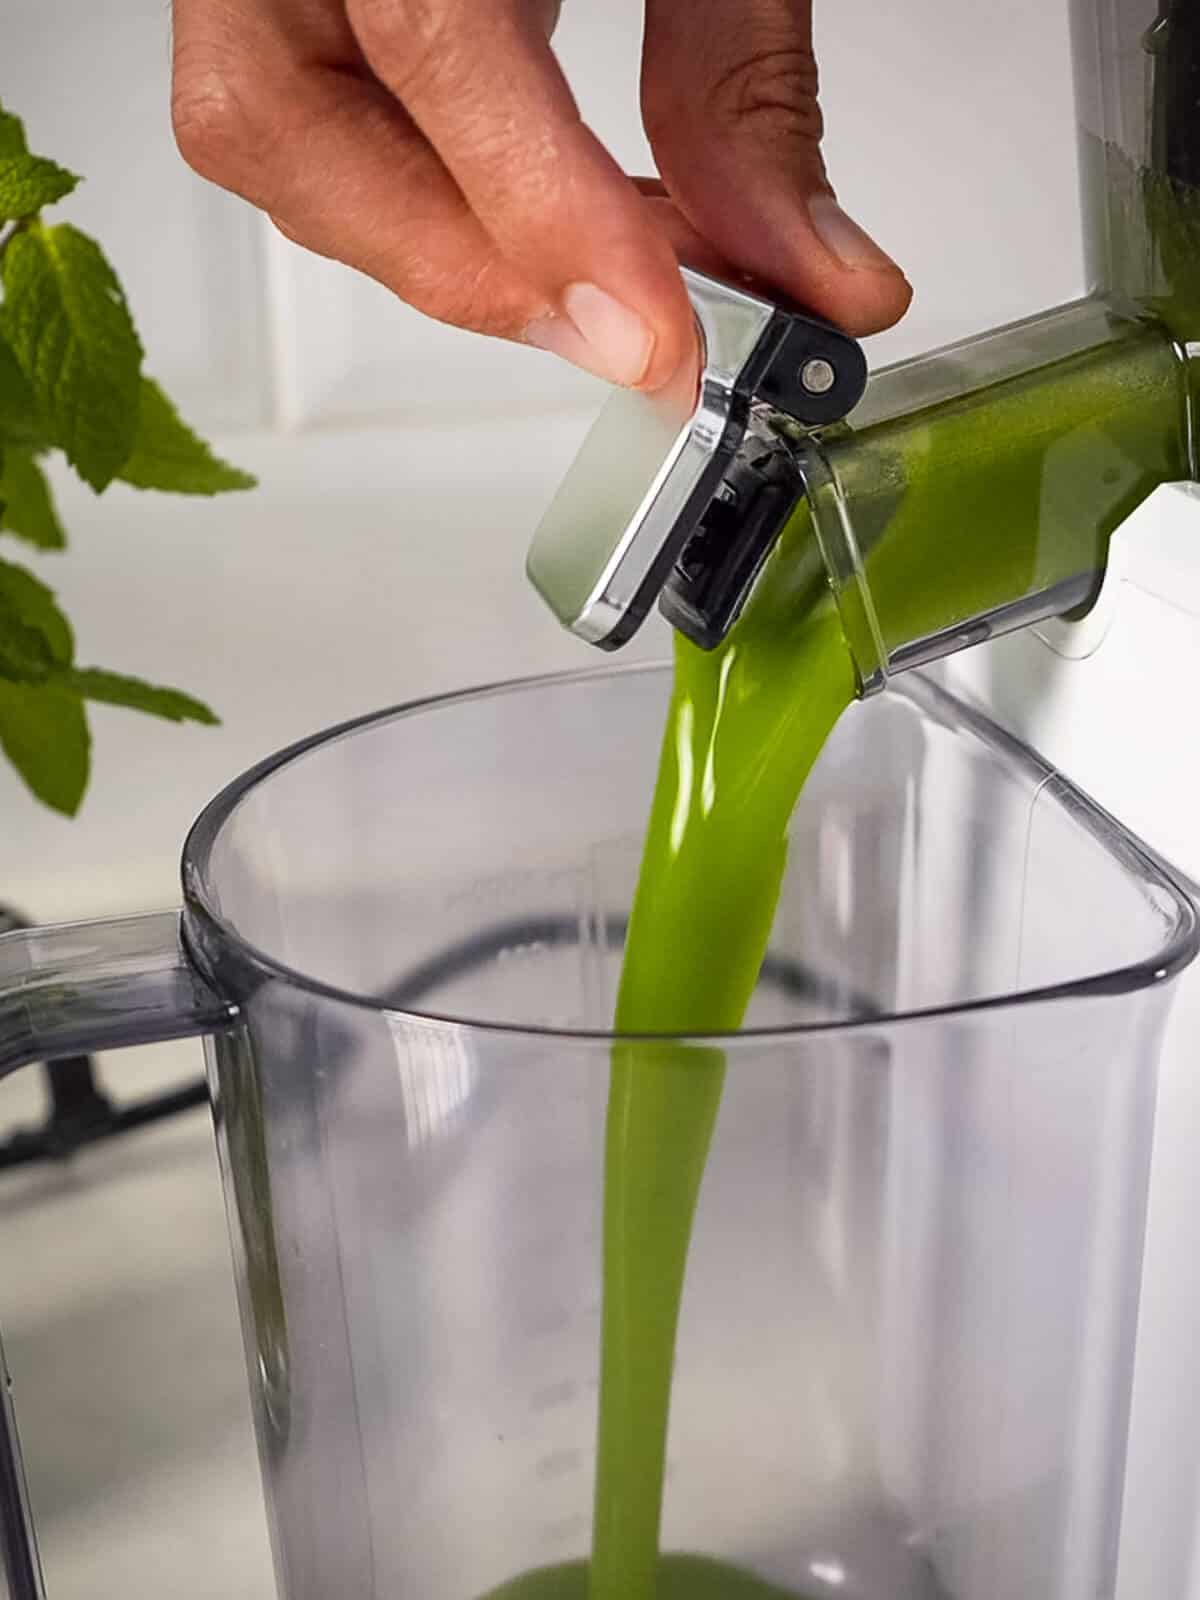 juice pouring from juicer.